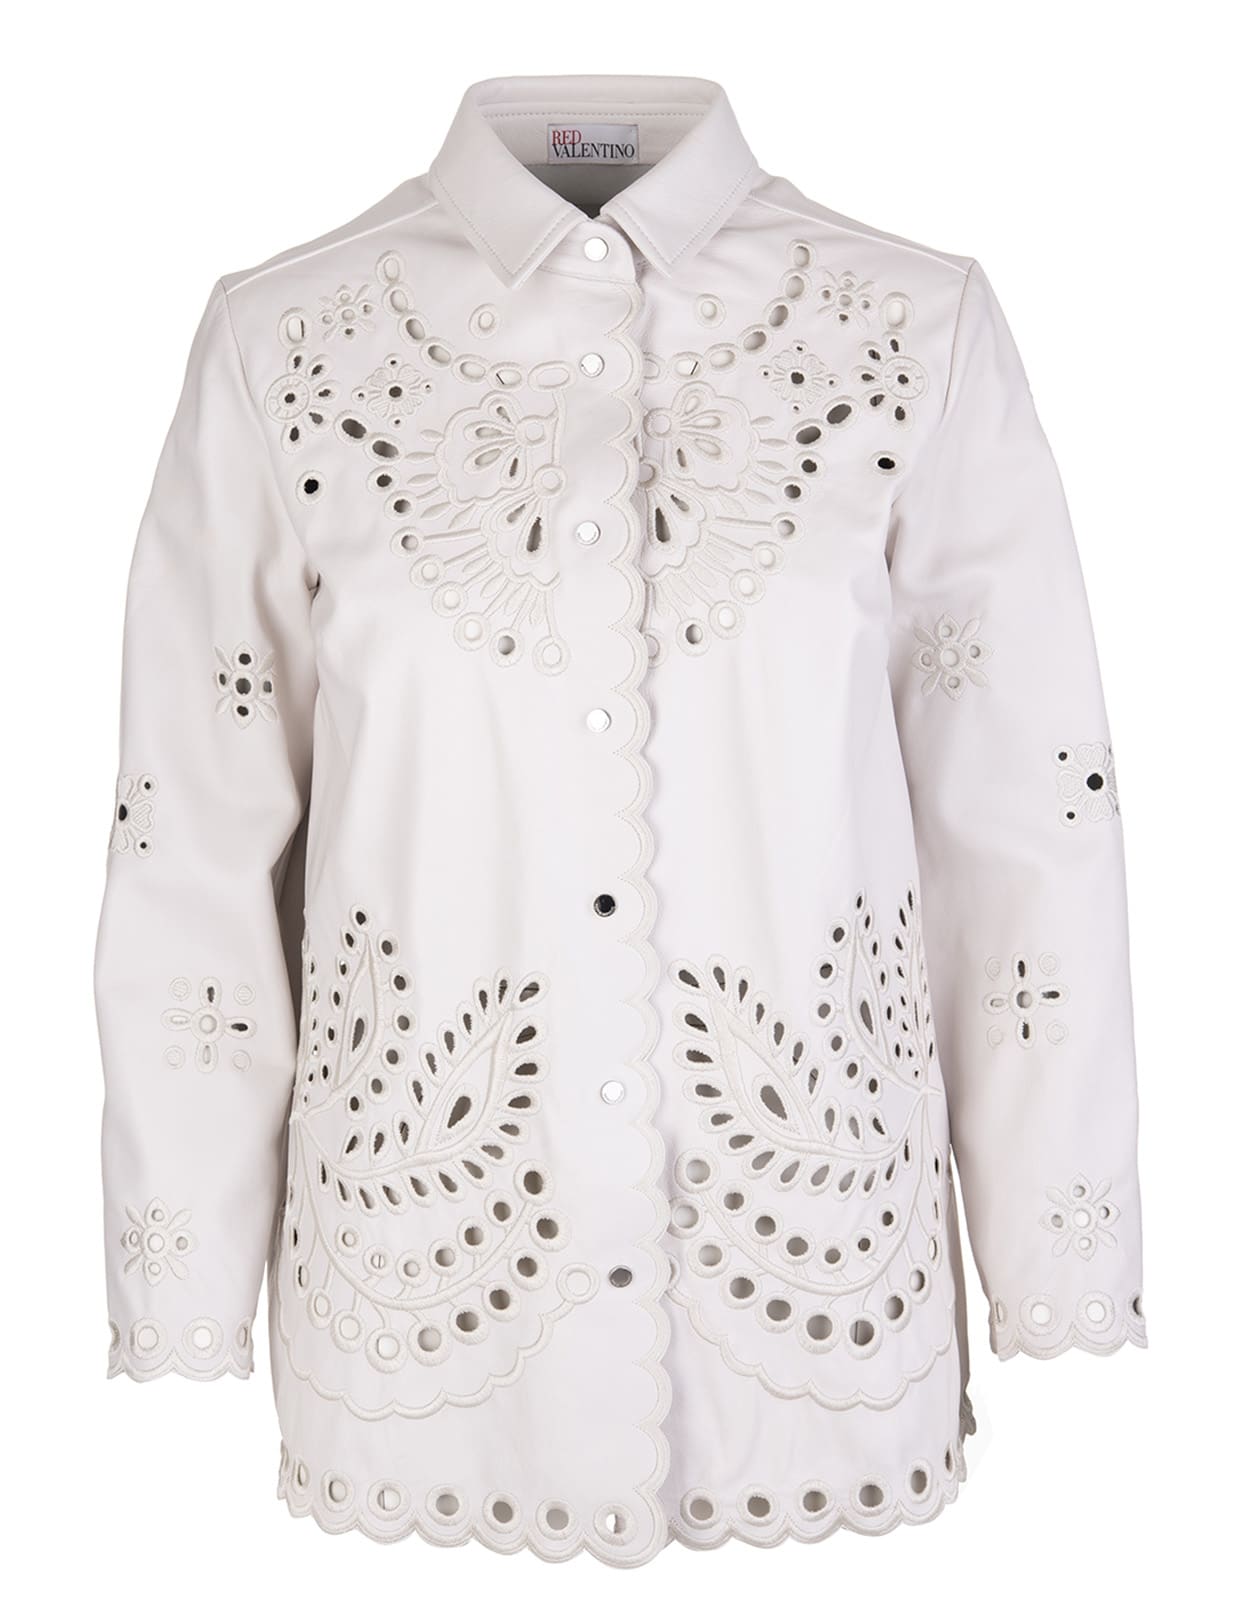 RED Valentino White Leather Shirt With Sangallo Embroidery